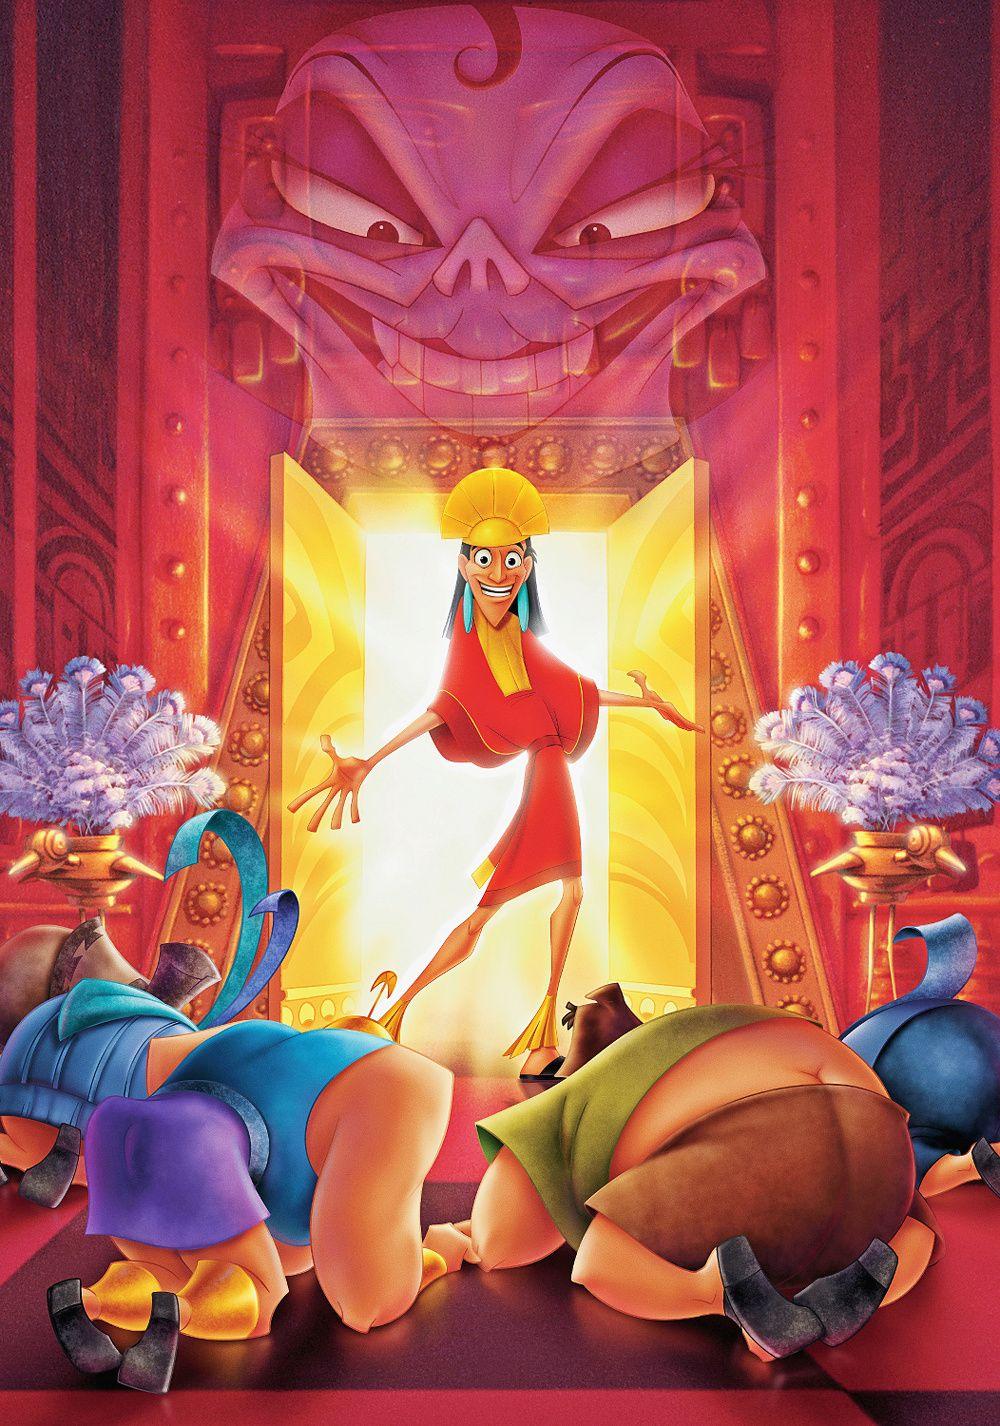 The Emperor's New Groove movie poster. Disney. Emperors